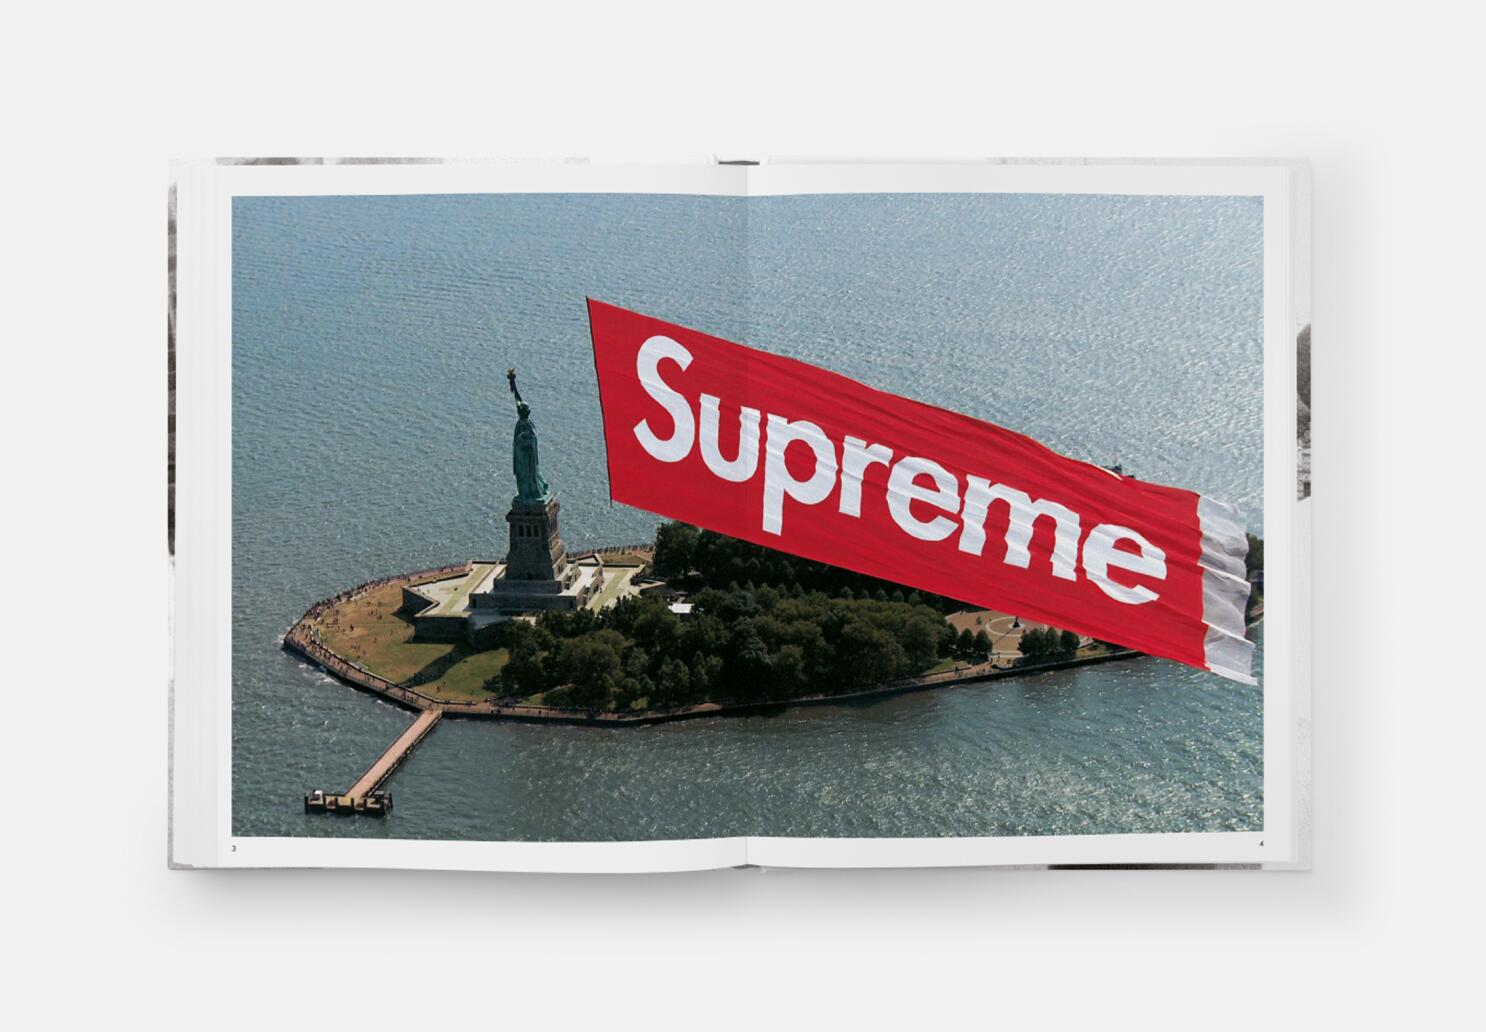 Just who wears Supreme clothing?, by Felix Magazine